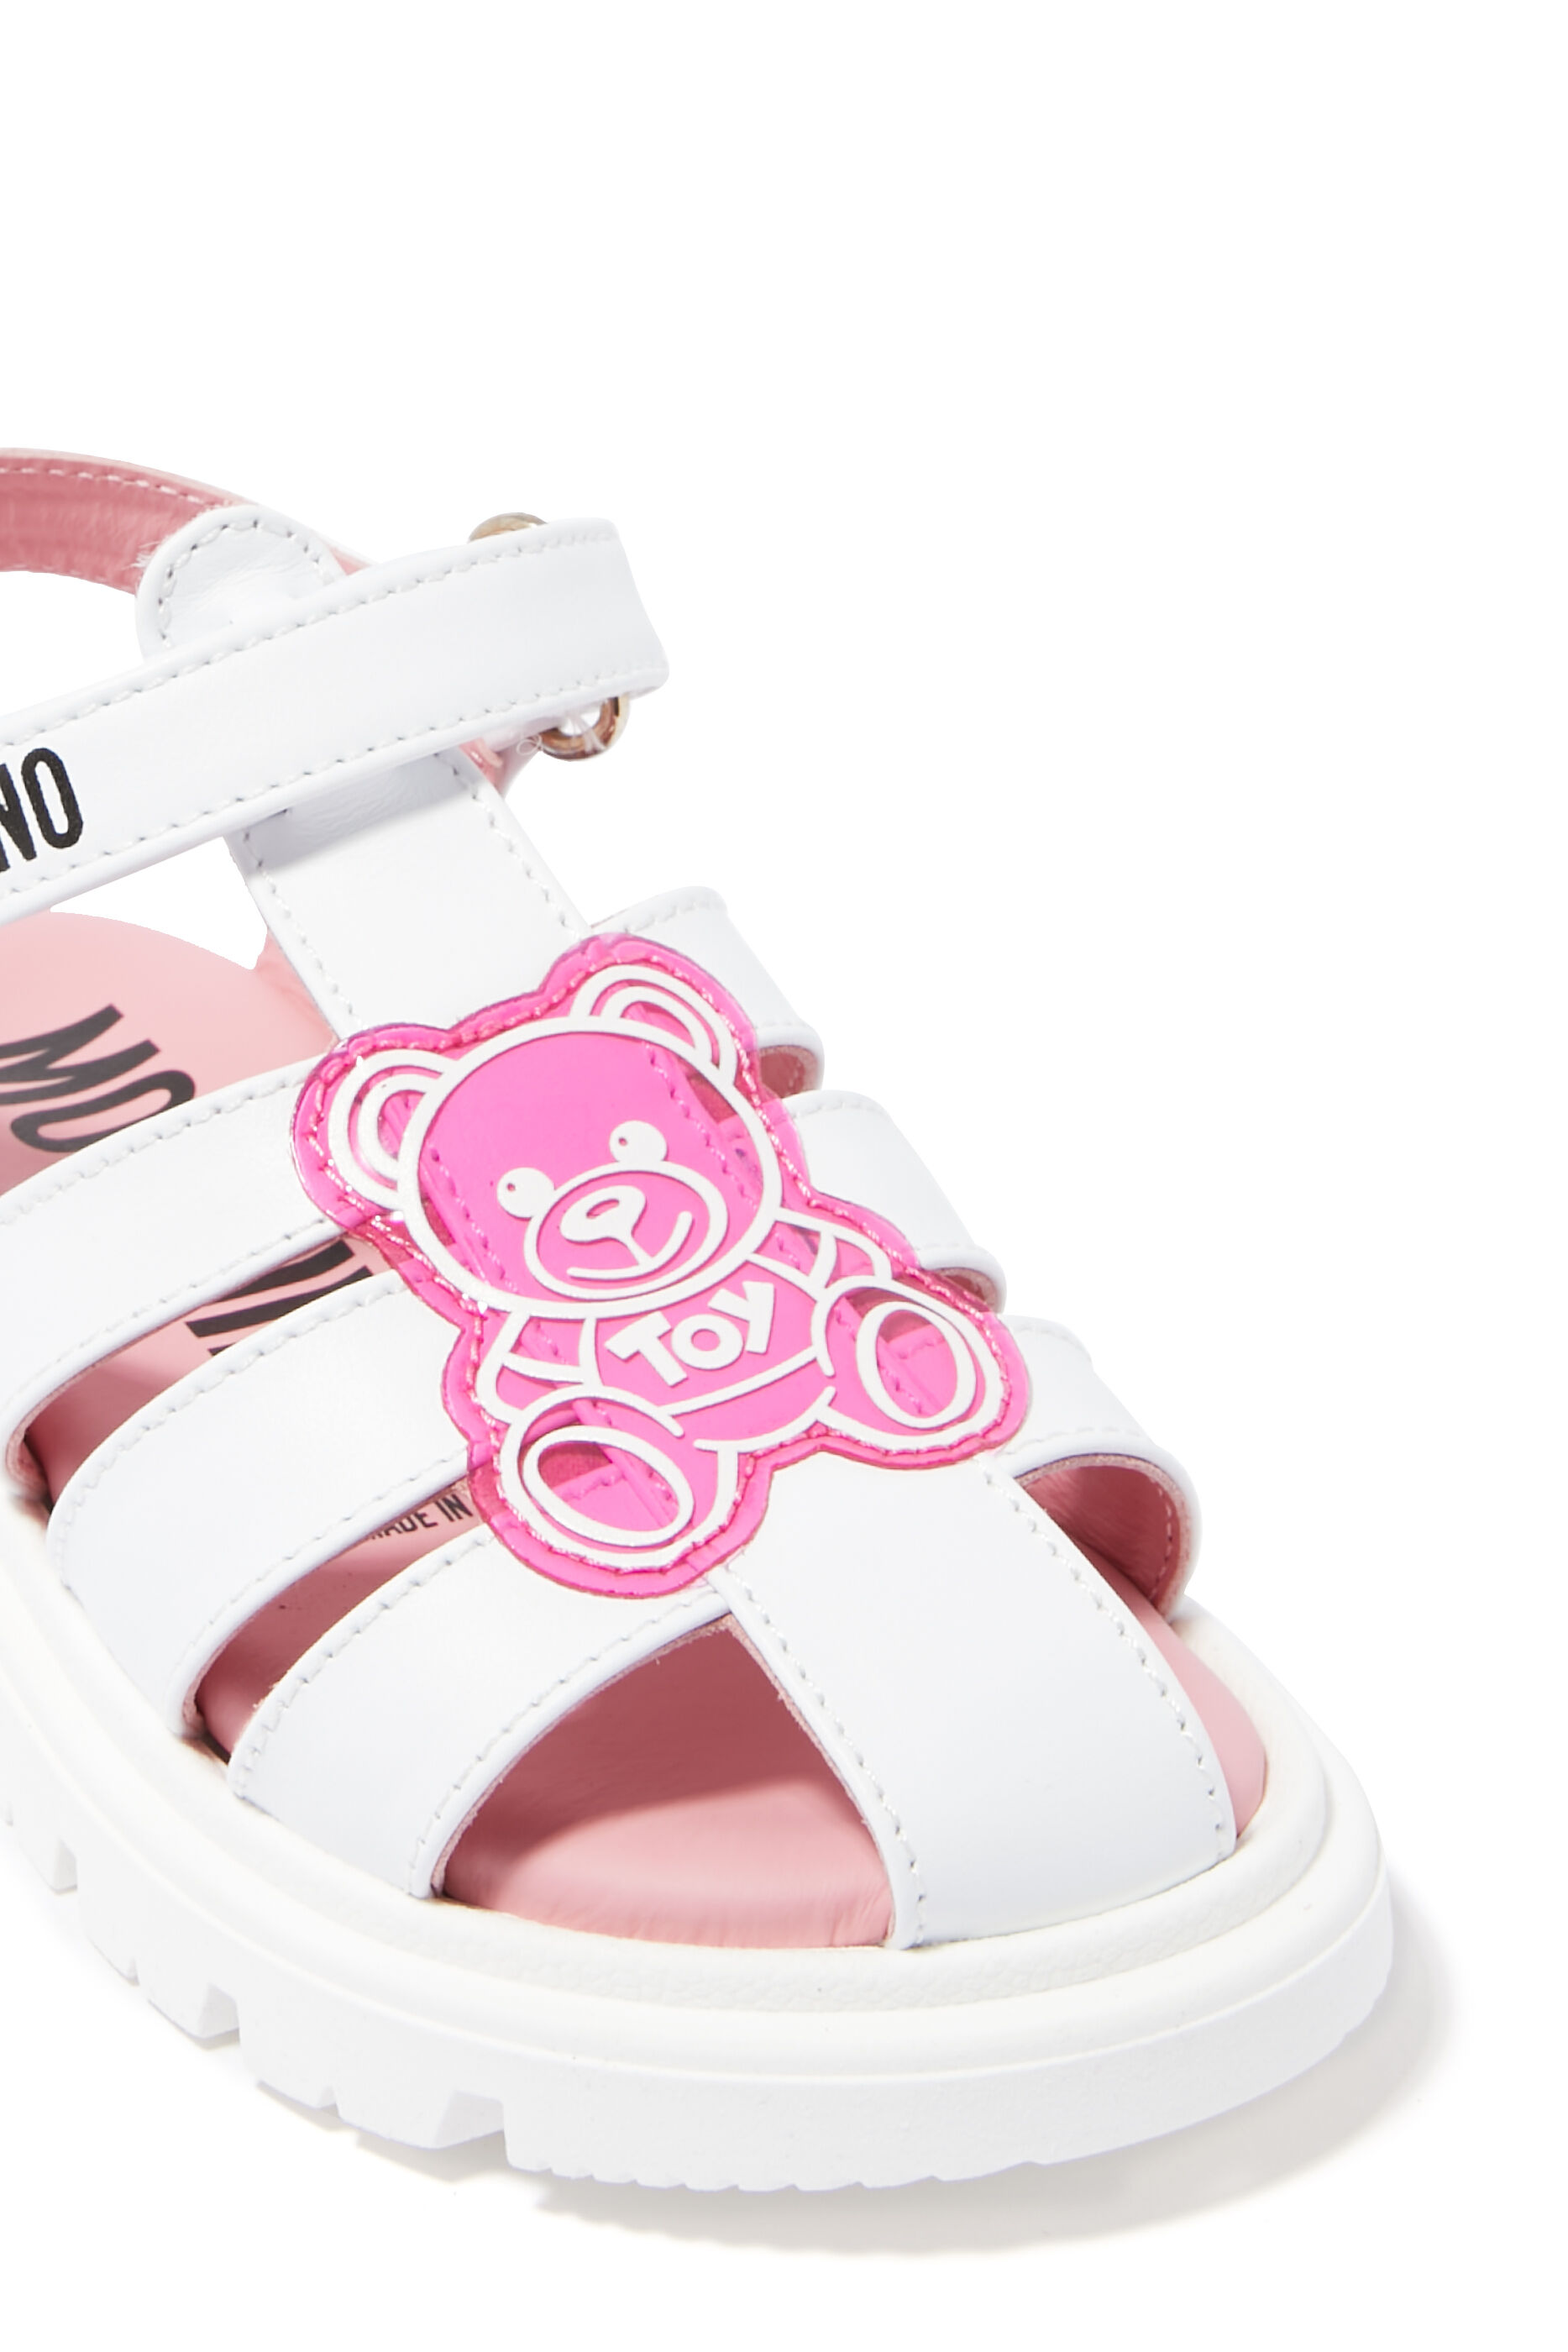 Moschino Kids Teddy Bear leather sandals - Red